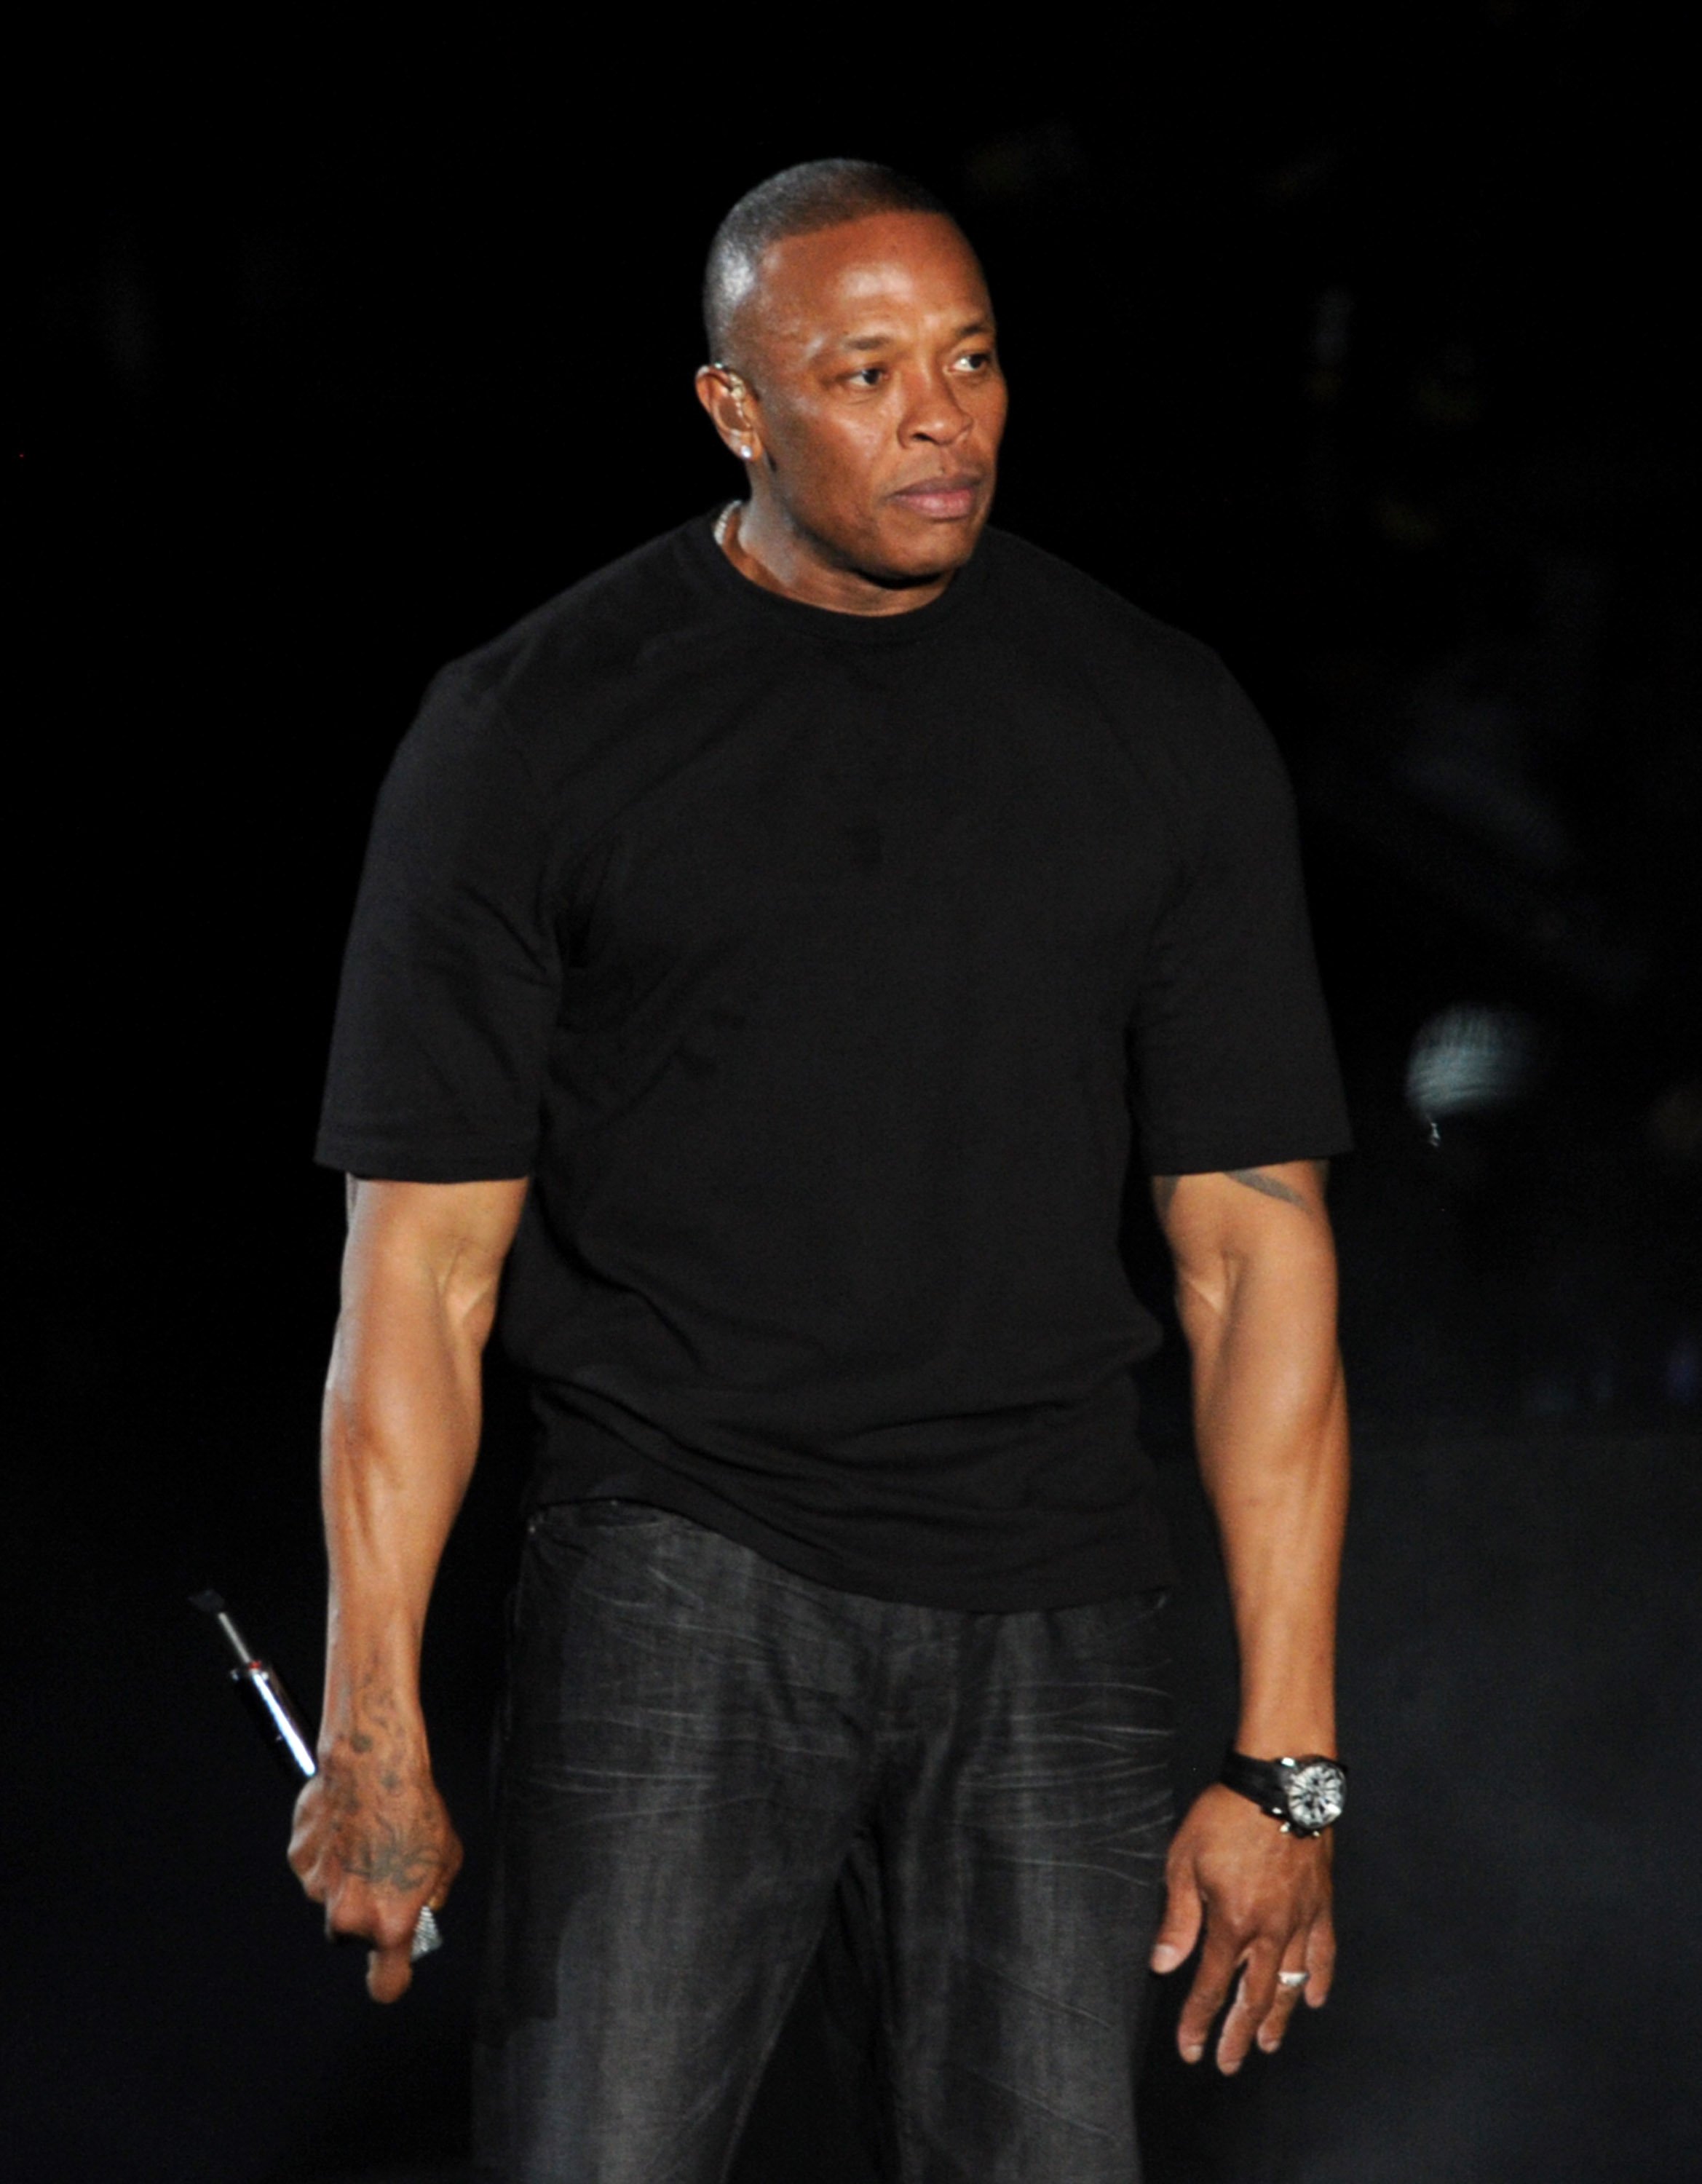 Dr. Dre performs onstage for the 2012 Coachella Valley Music & Arts Festival at the Empire Polo Field on April 15, 2012, in Indio, California | Source: Getty Images